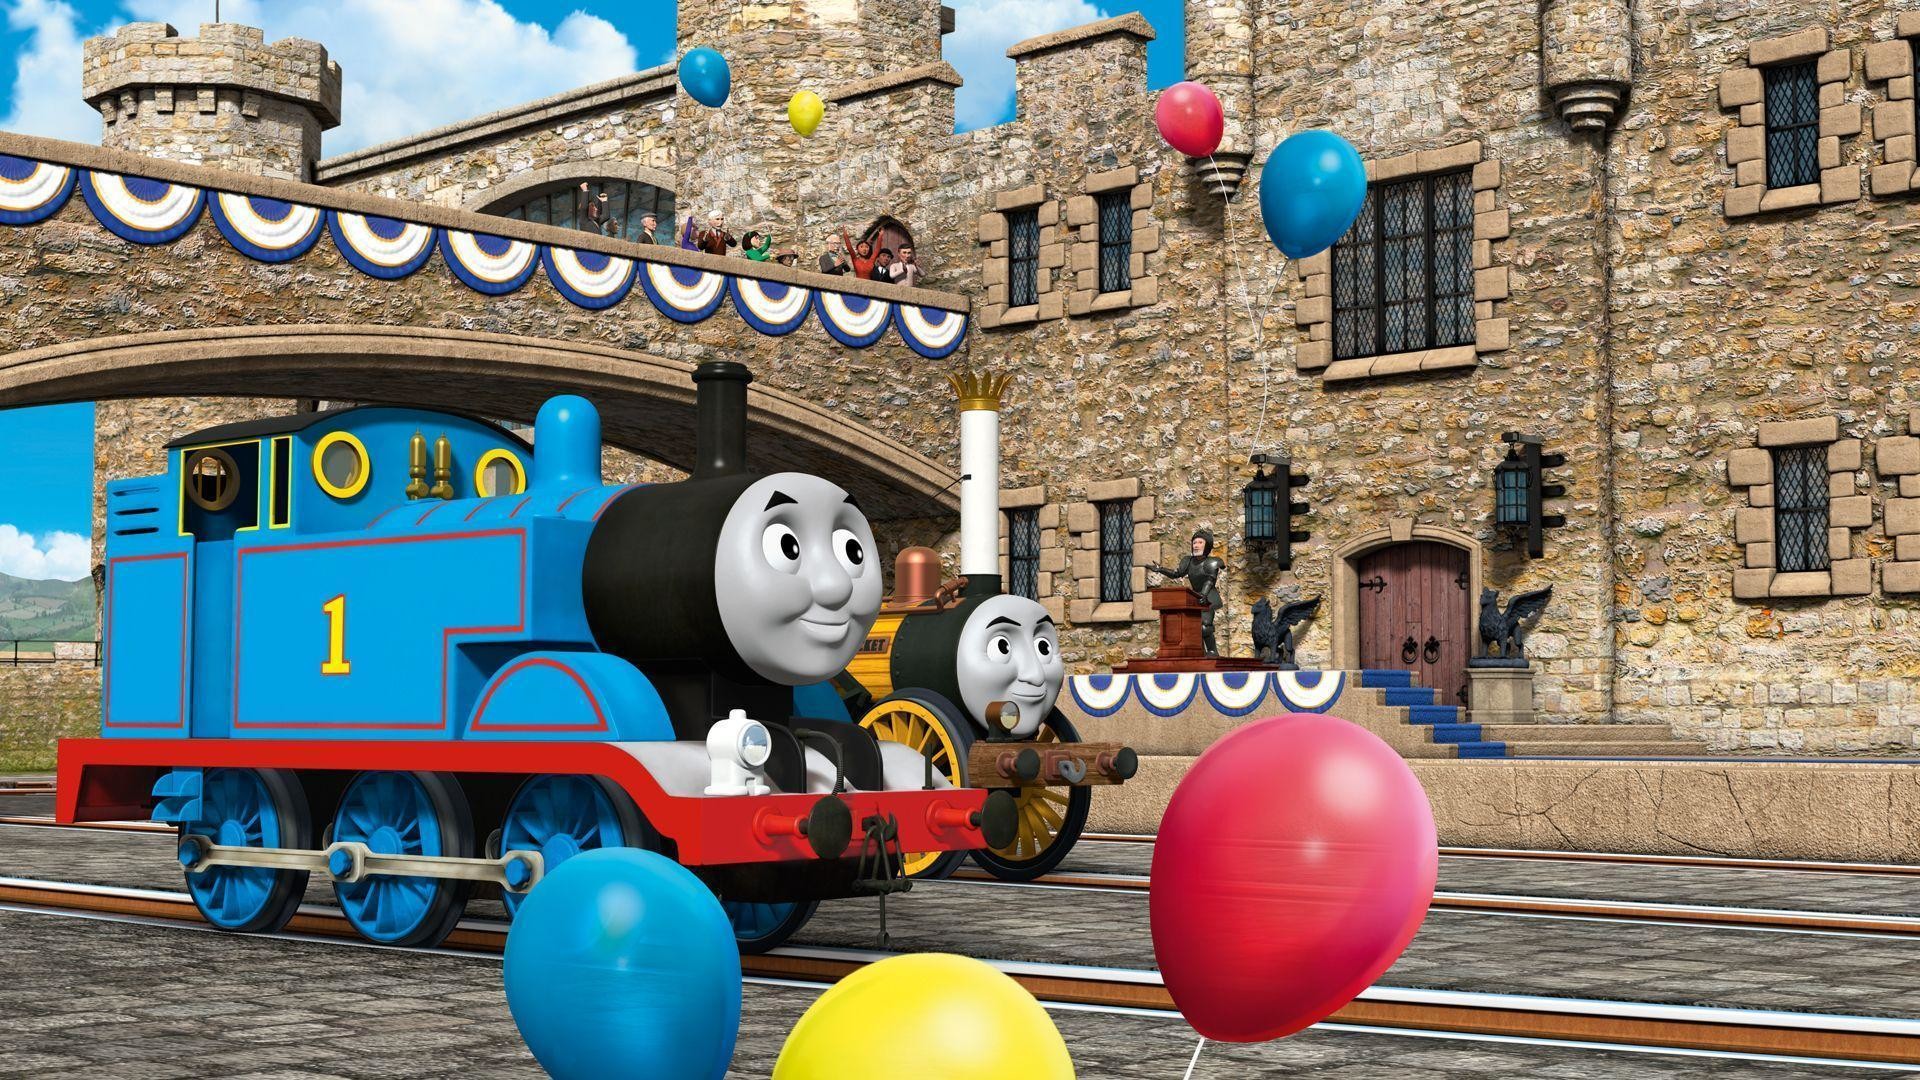 1920x1080 Thomas And Friends Wallpaper HD, Full HDQ Thomas And Friends HD .